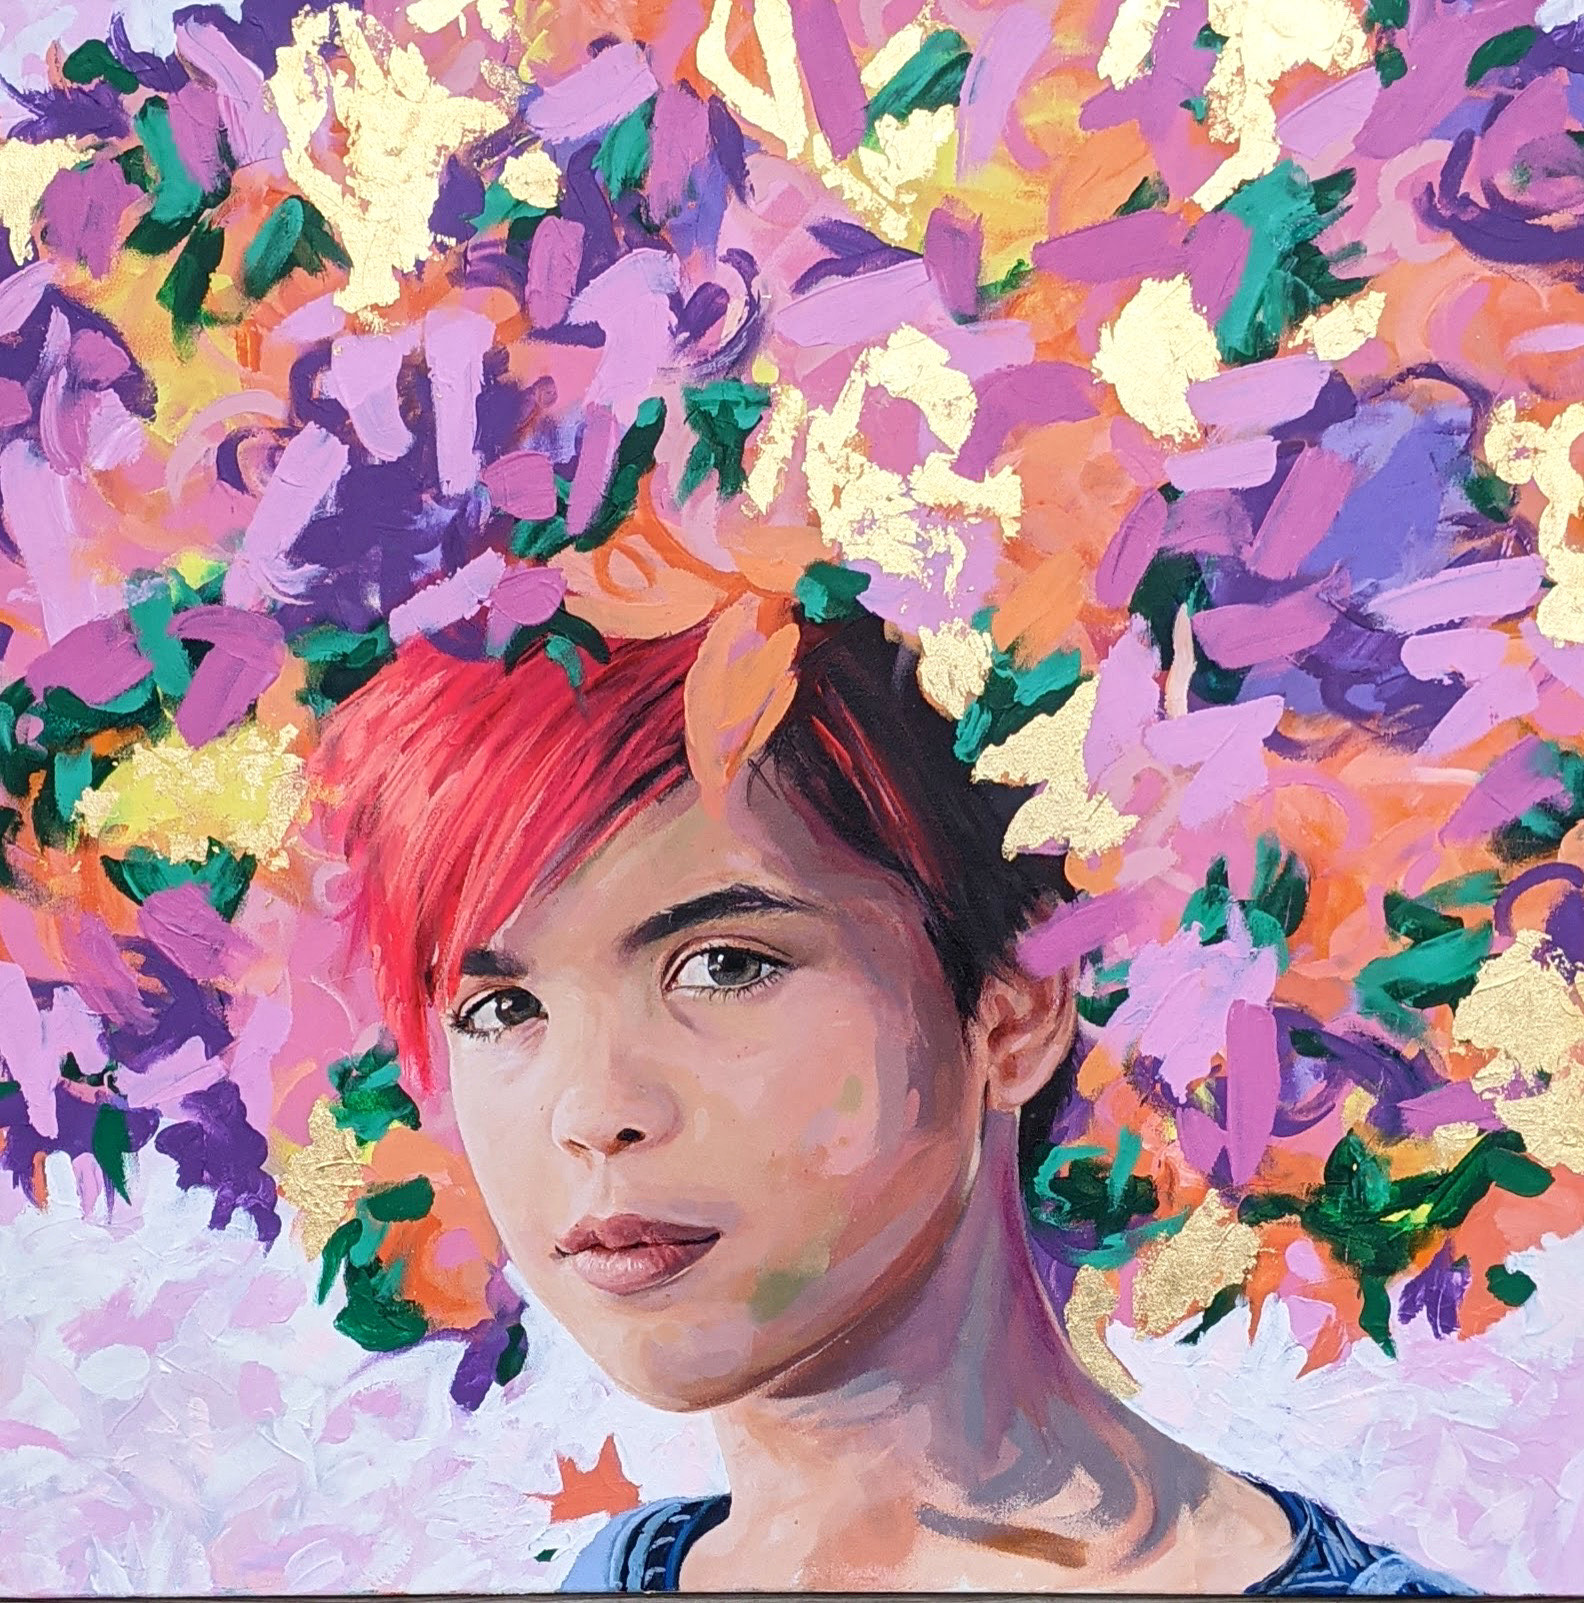 A painting from Alice Blessing's "Thirteen: Nonconformity" exhibition. A tween child with a large brightly-painted crown of flowers.